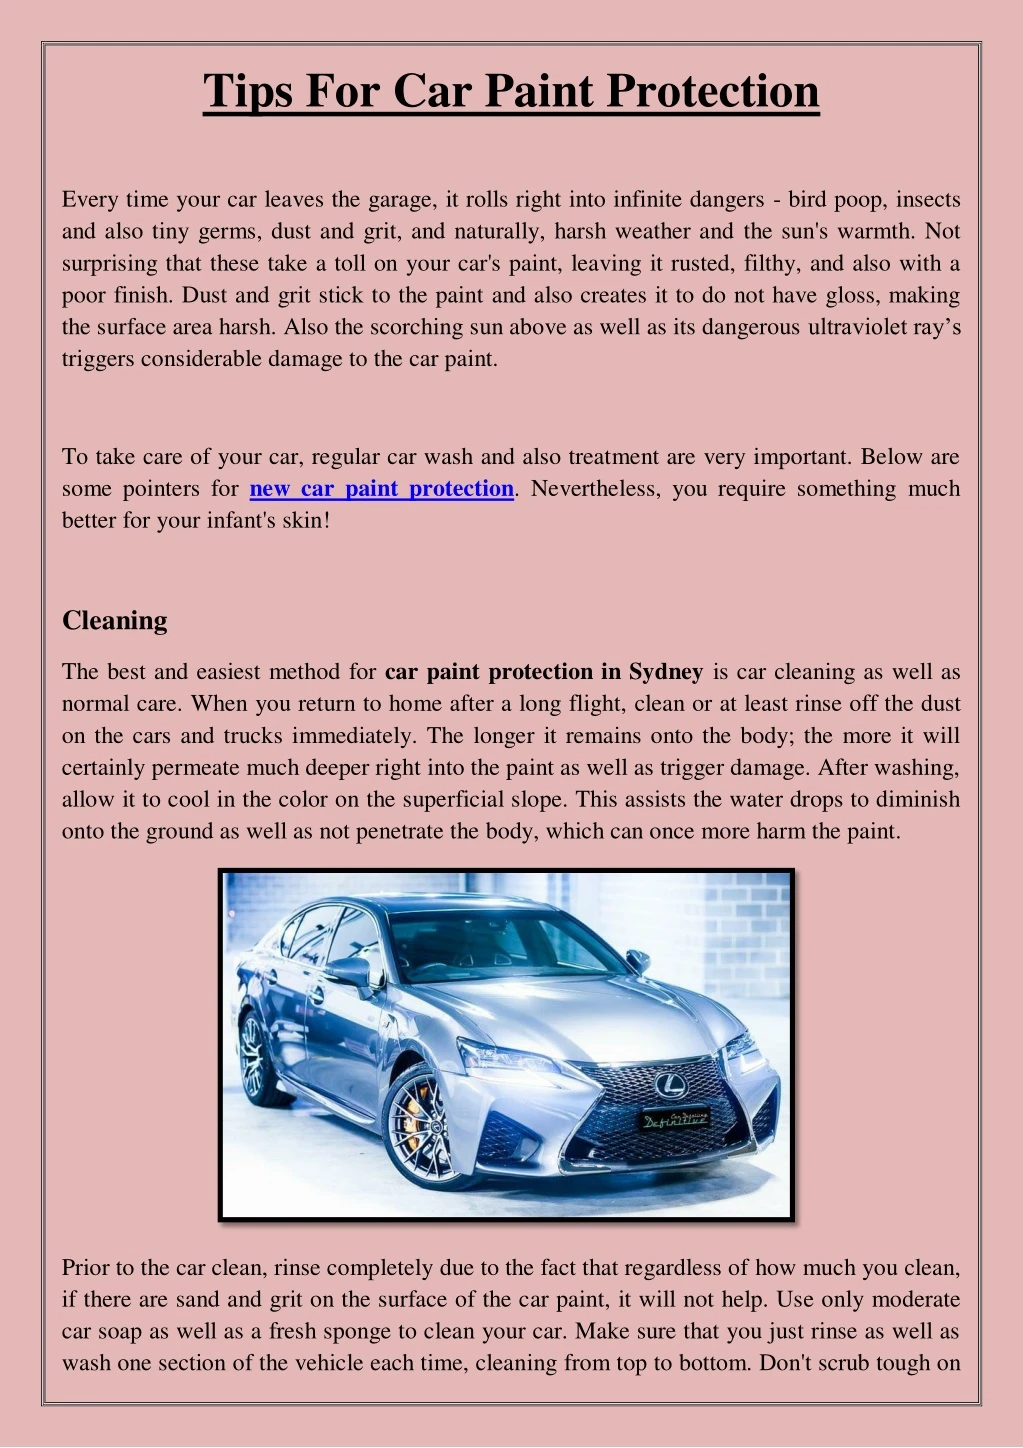 tips for car paint protection